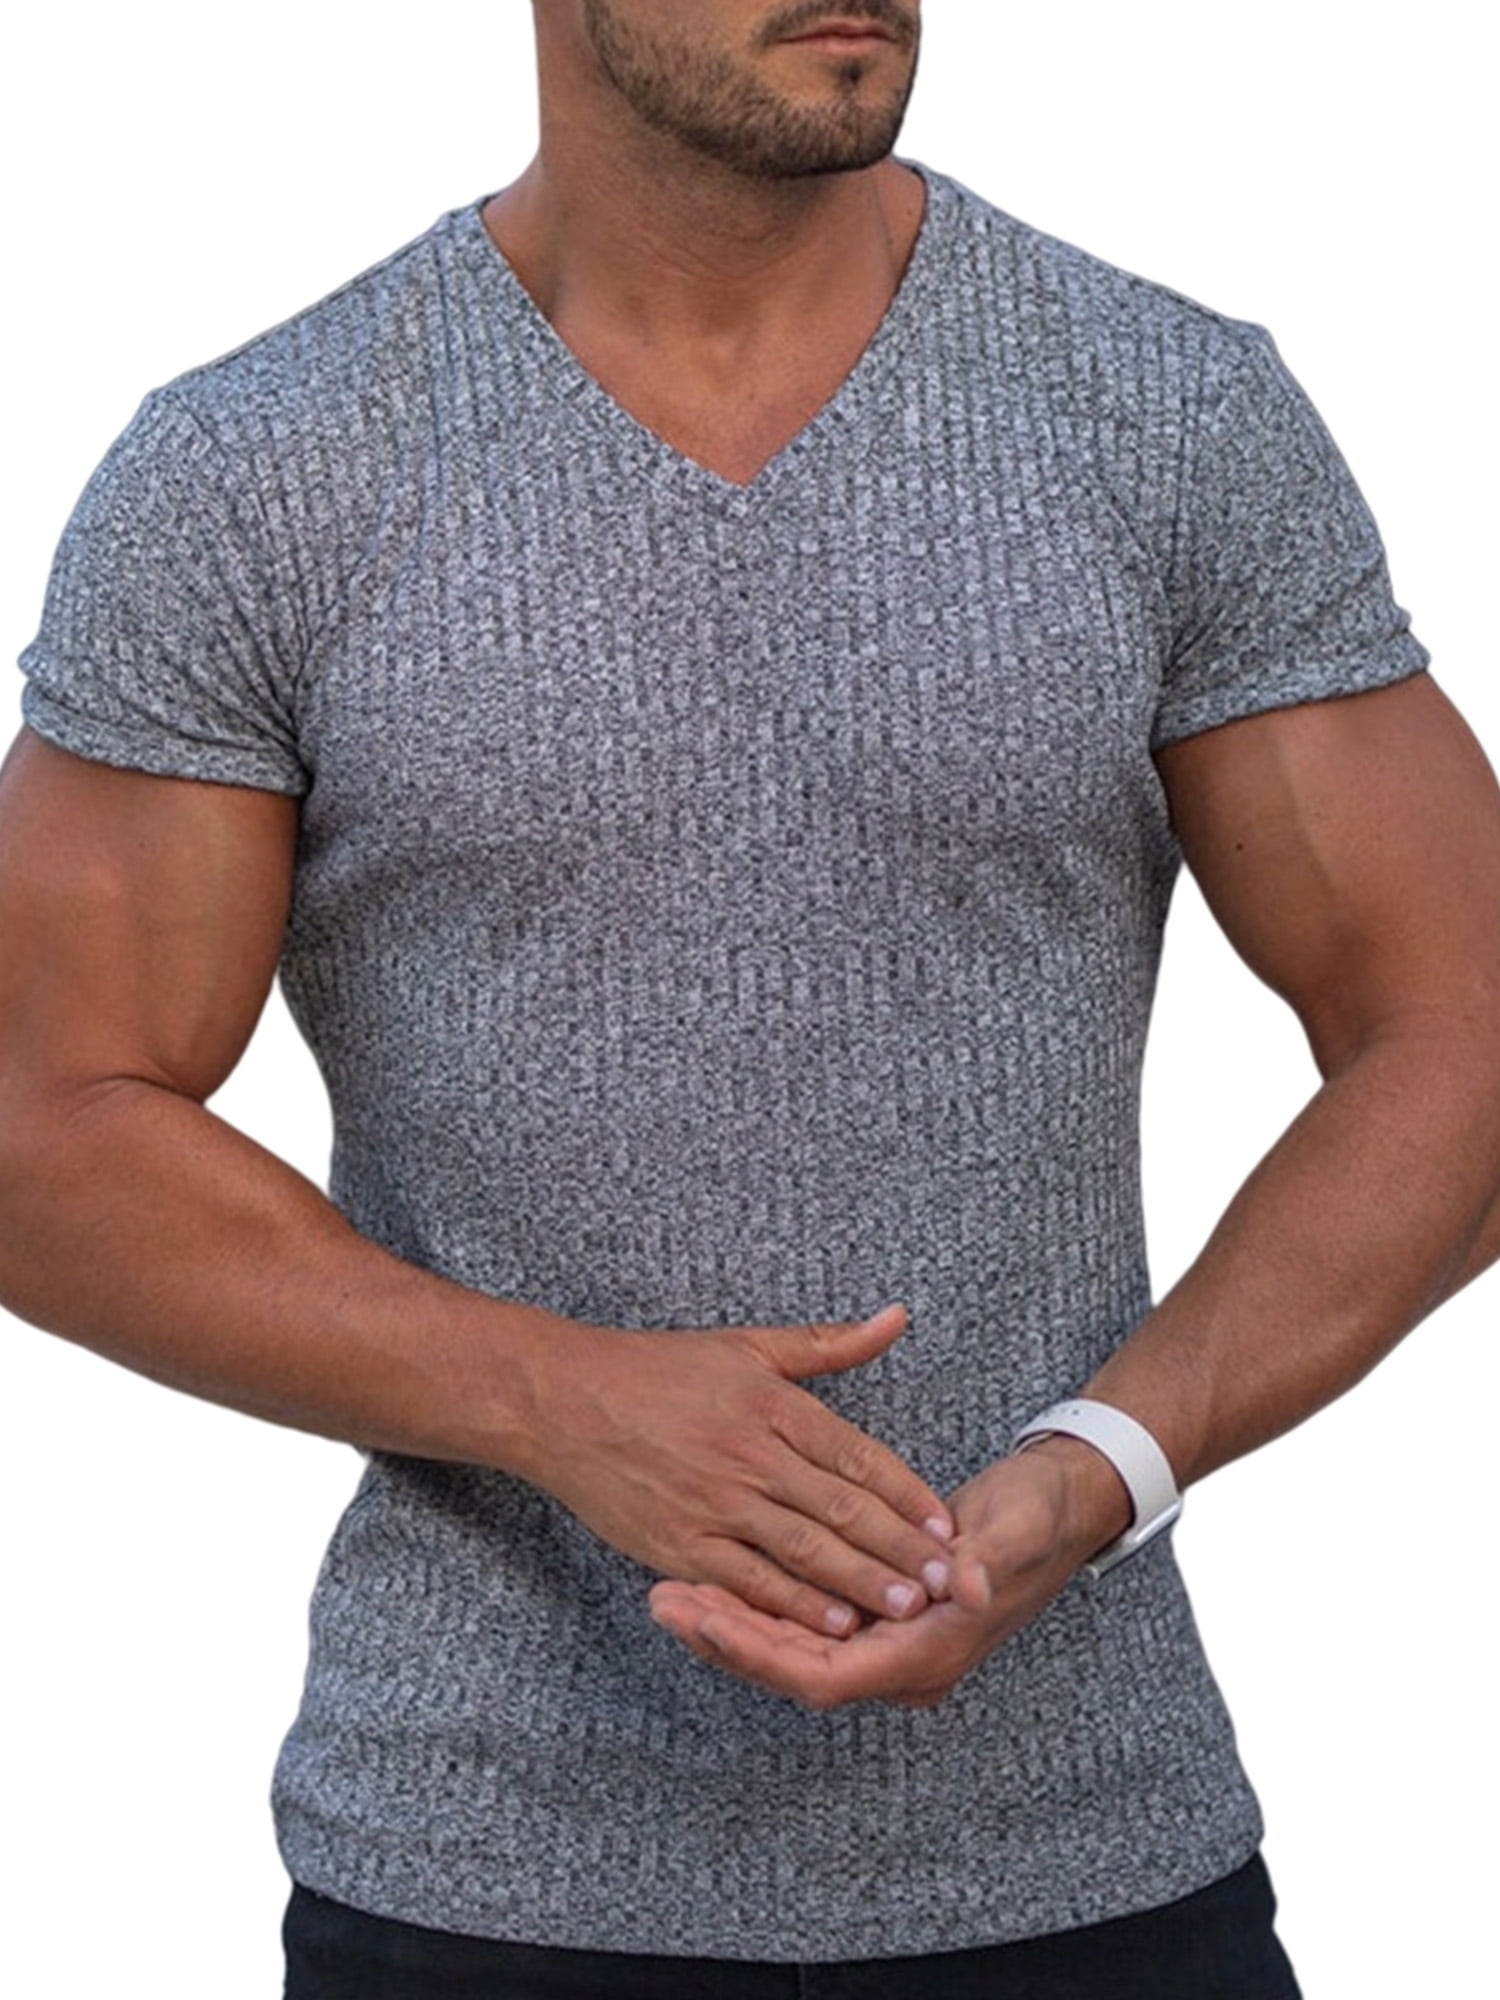 Mens Slim Fit V Neck Short Sleeve T Shirt Muscle Top Gym Plain Casual Tee Blouse 